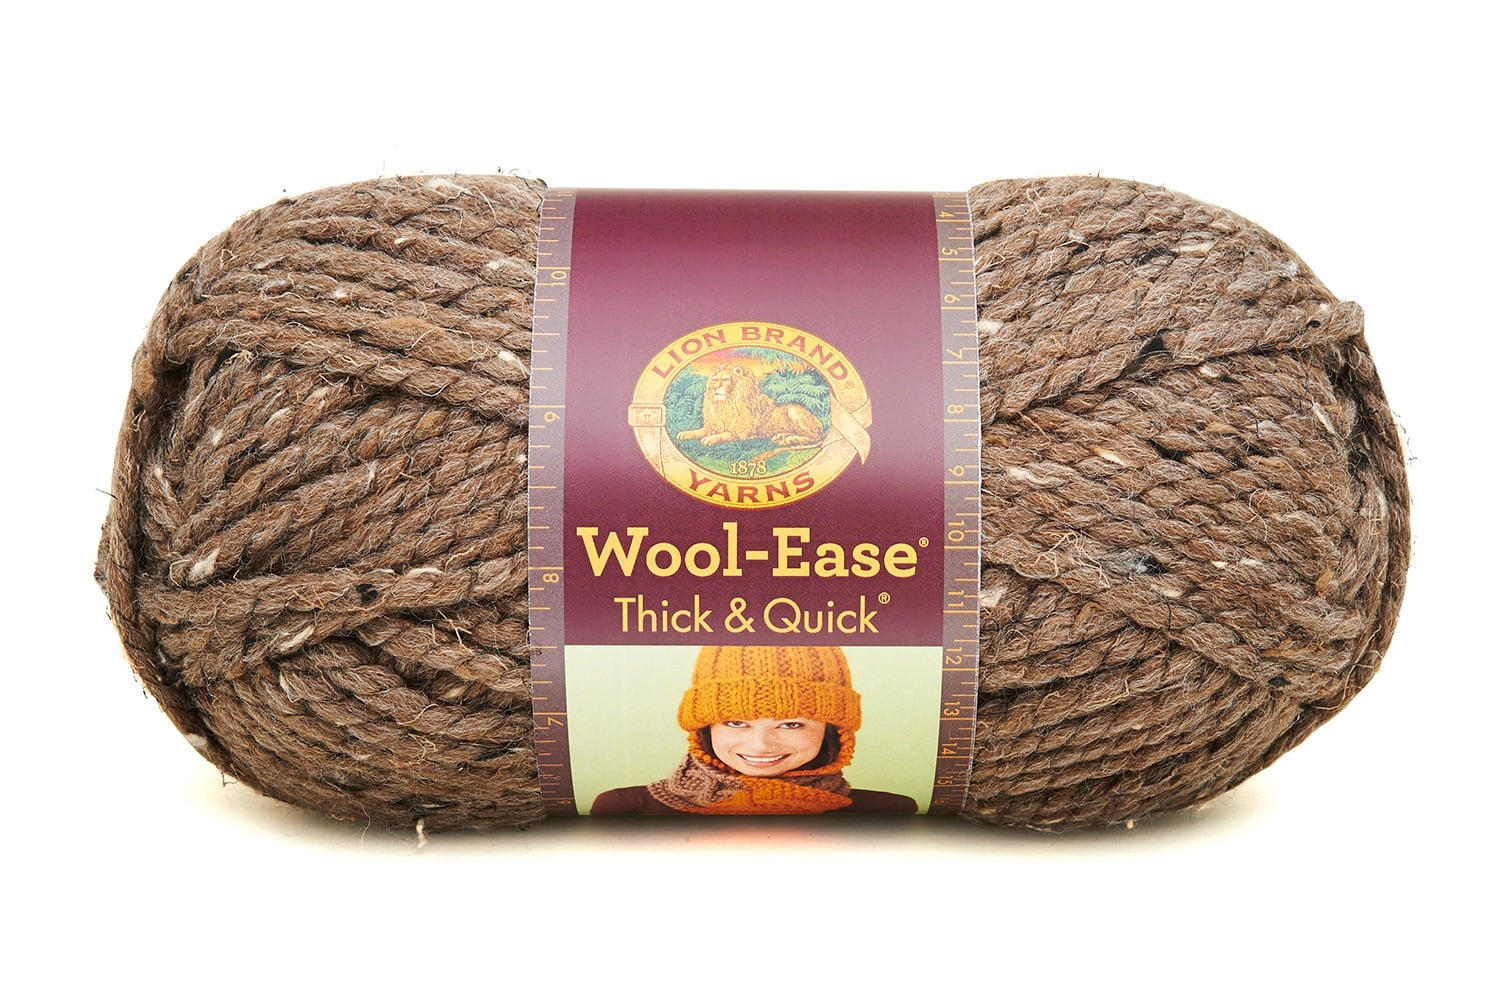 640-123e Wool-Ease Thick & Quick Yarn, 97 Meters, Oatmeal - China Wool Ease  Yarn Skeins and Yarn Skeins price